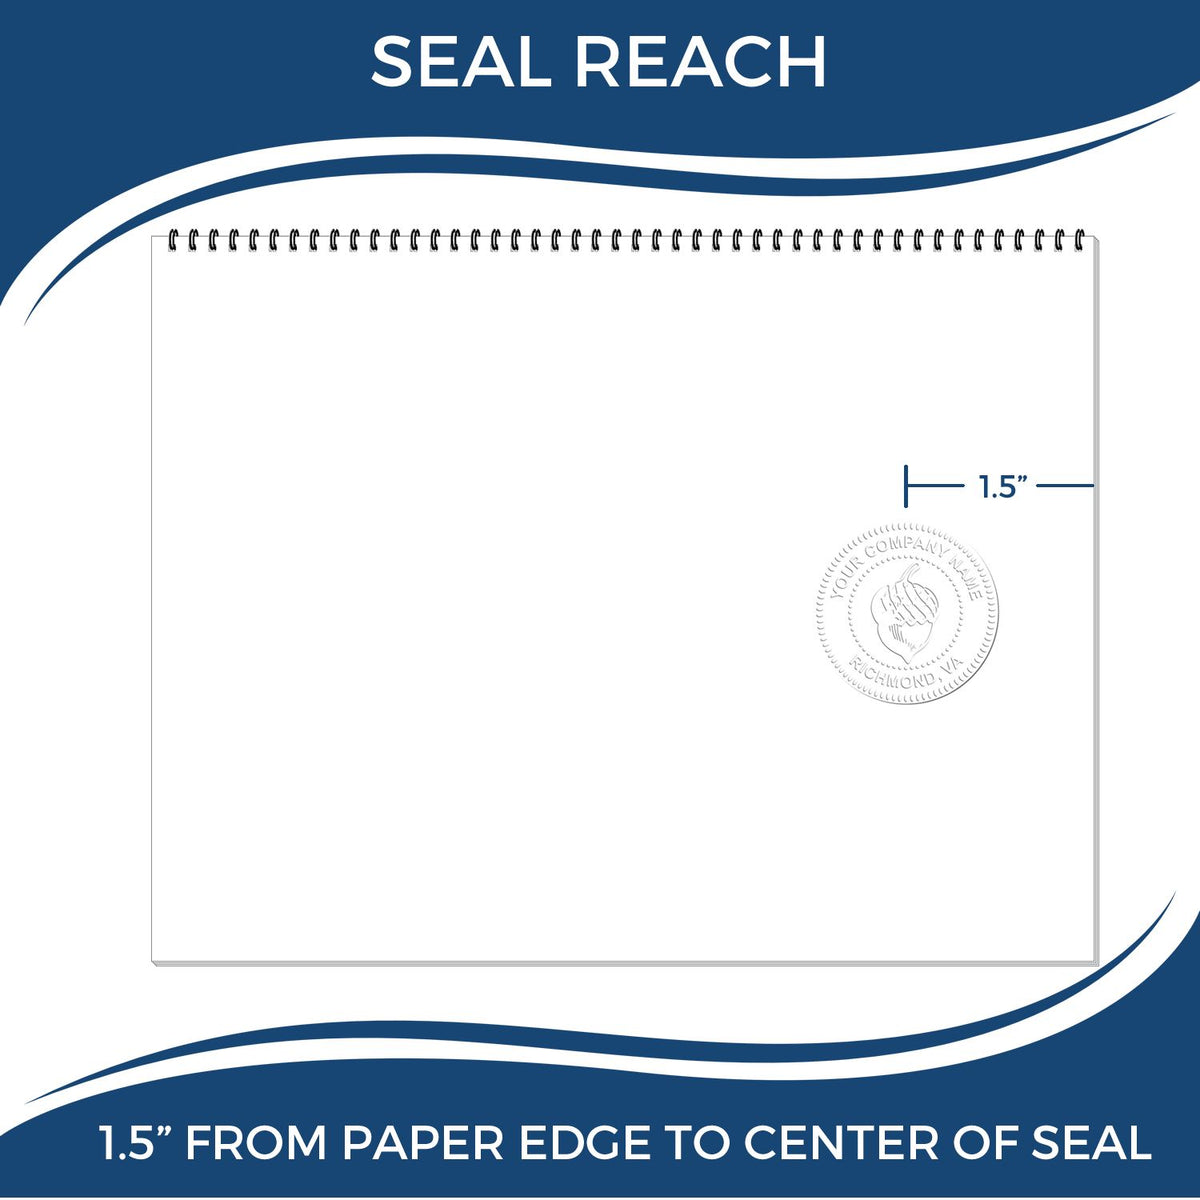 An infographic showing the seal reach which is represented by a ruler and a miniature seal image of the Soft Wyoming Professional Engineer Seal